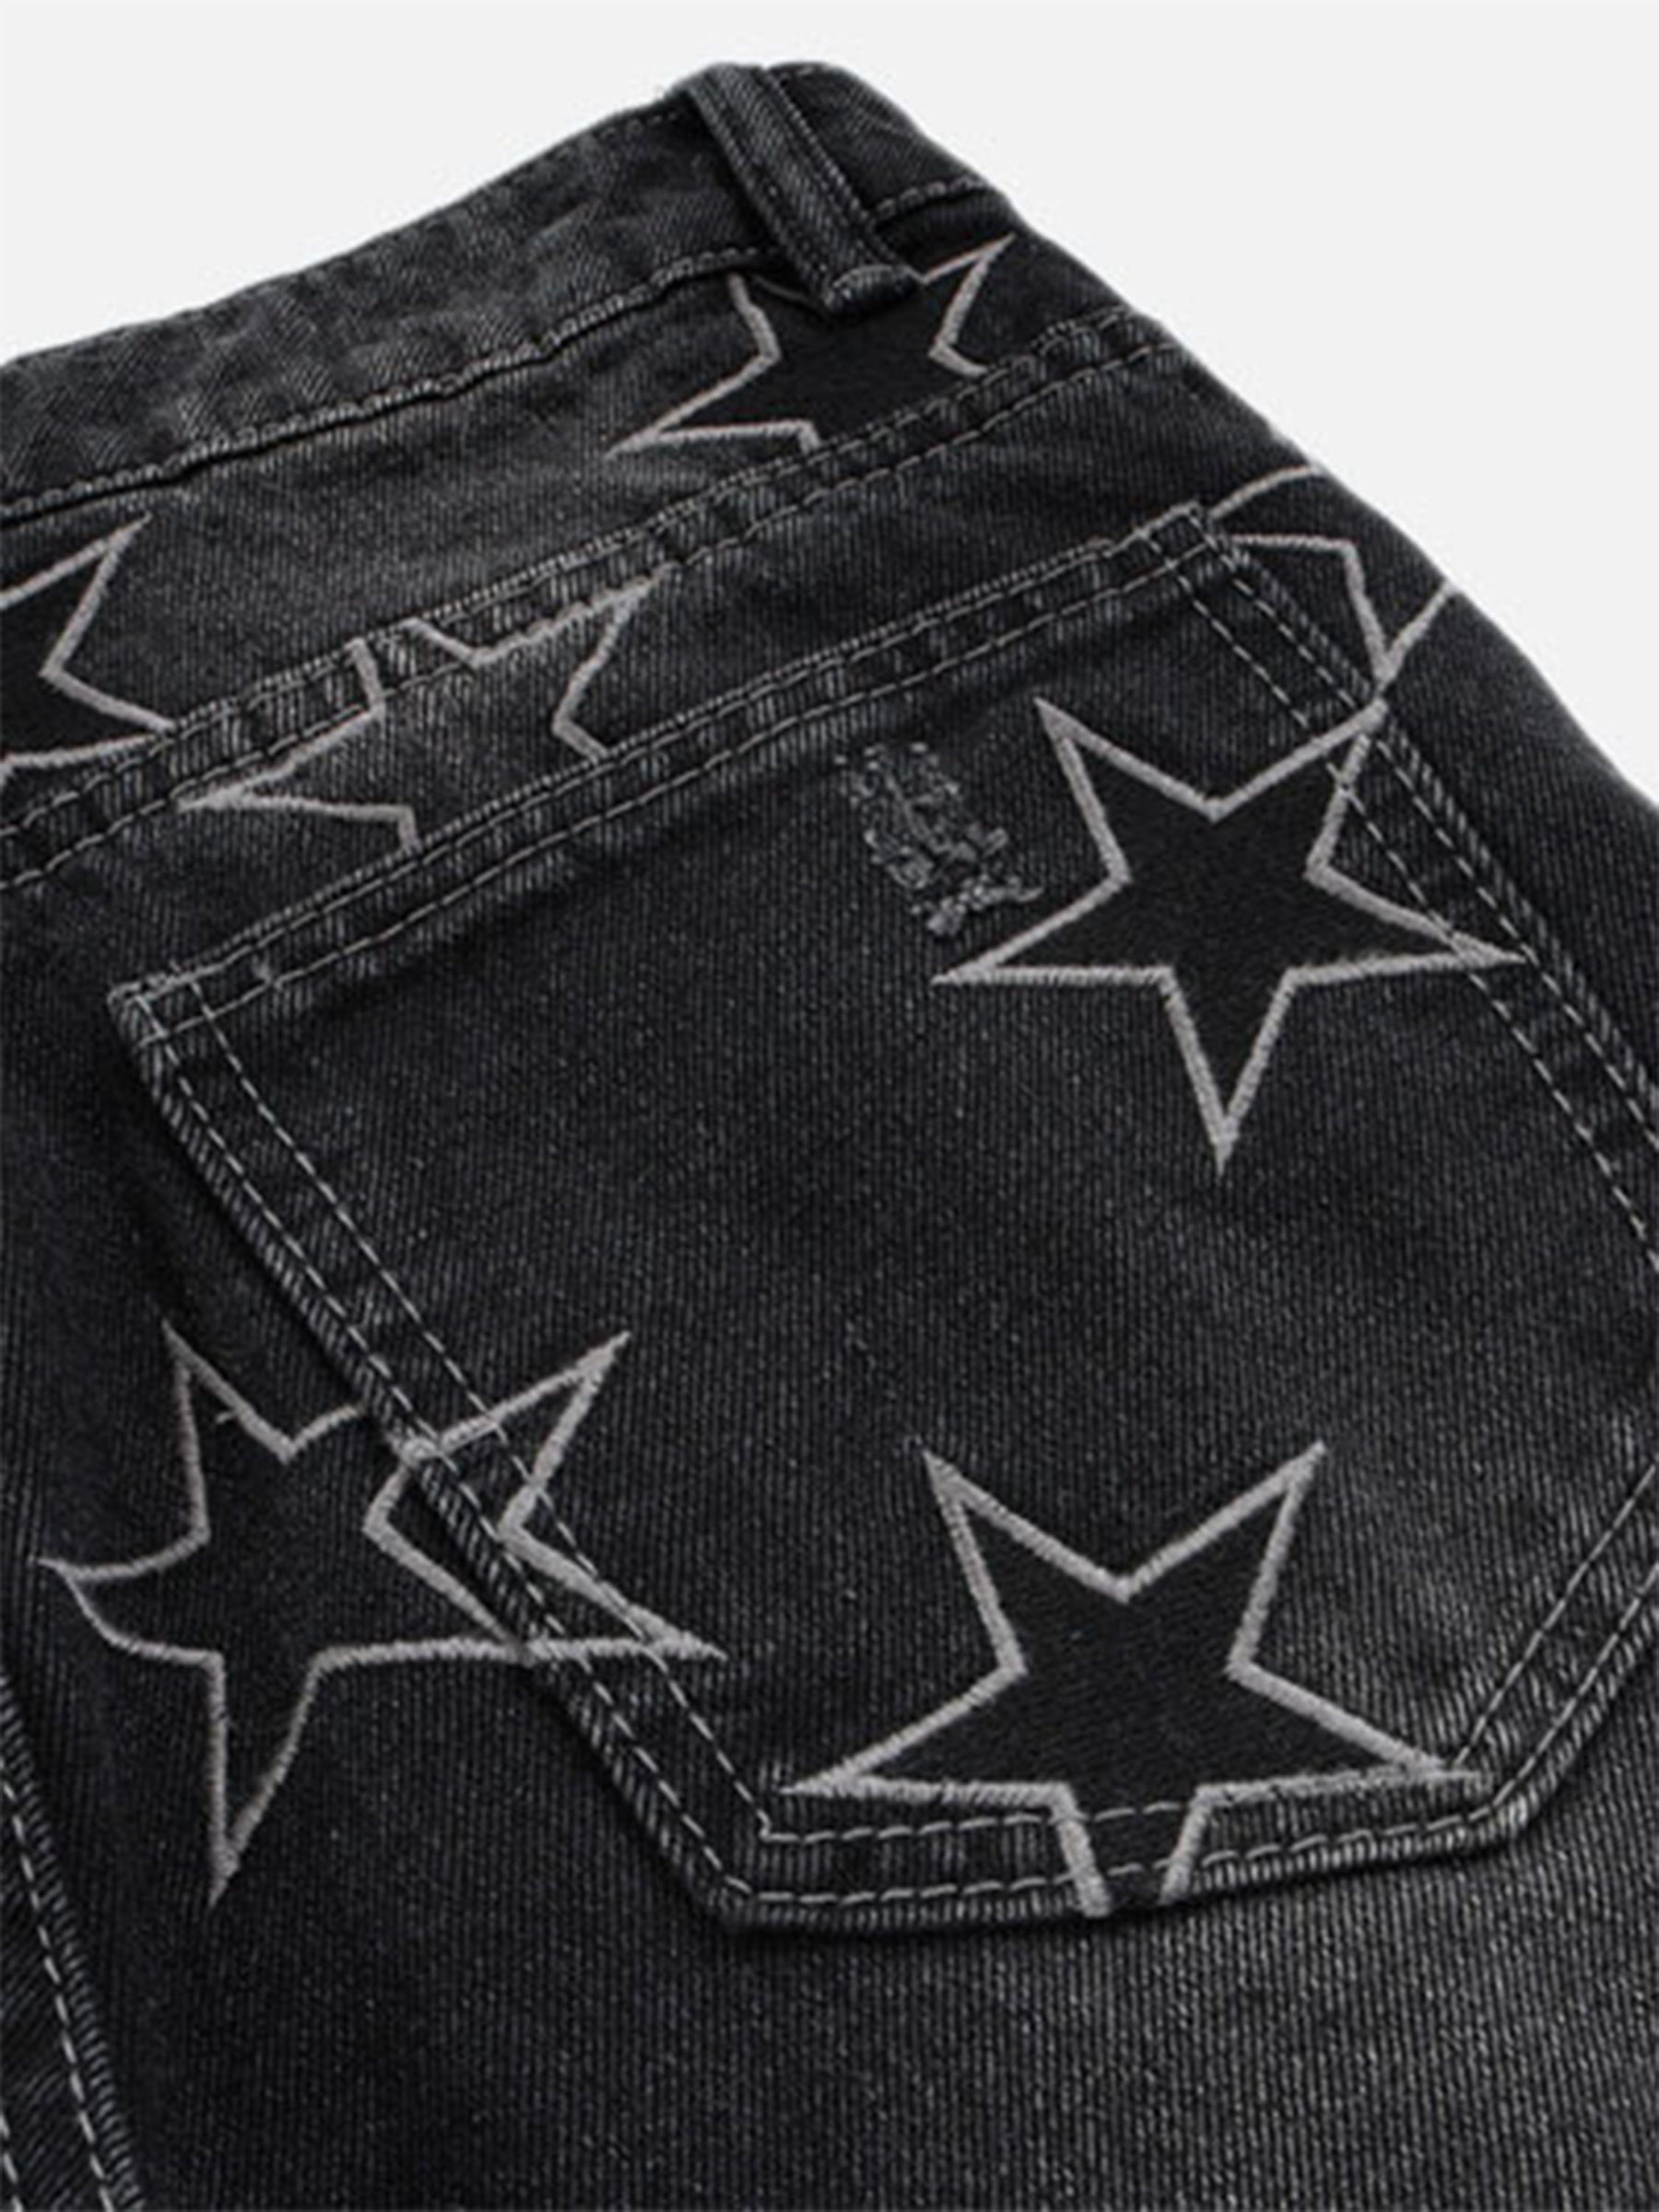 LUXENFY™ - American Street Style Pentagram Print Old Straight Jeans luxenfy.com